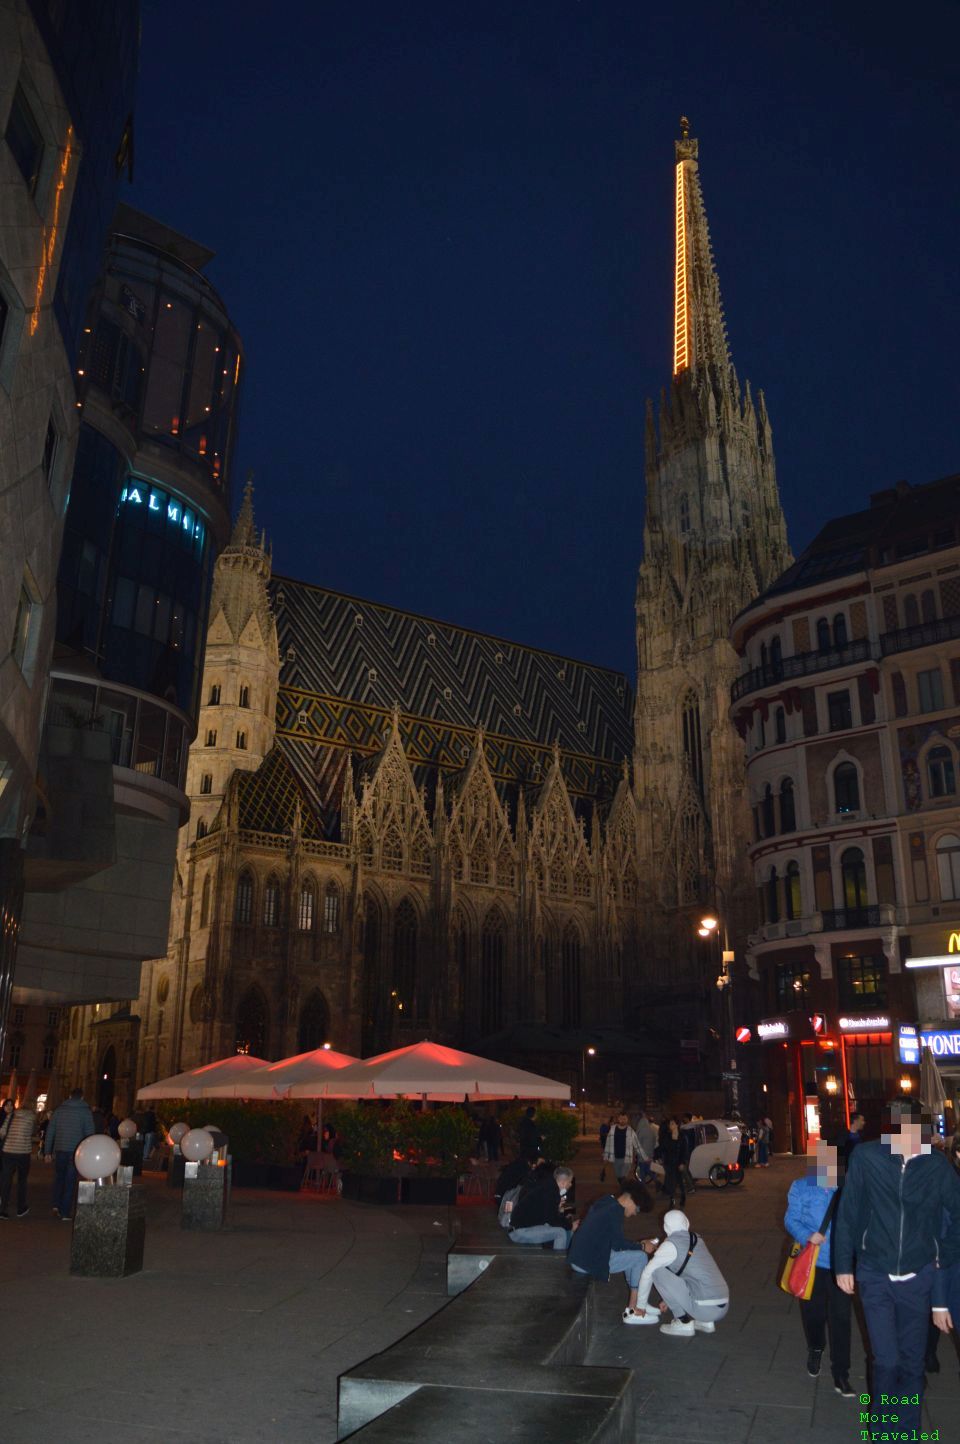 Enjoying a spring weekend in Vienna - St. Stephen's Cathedral at night